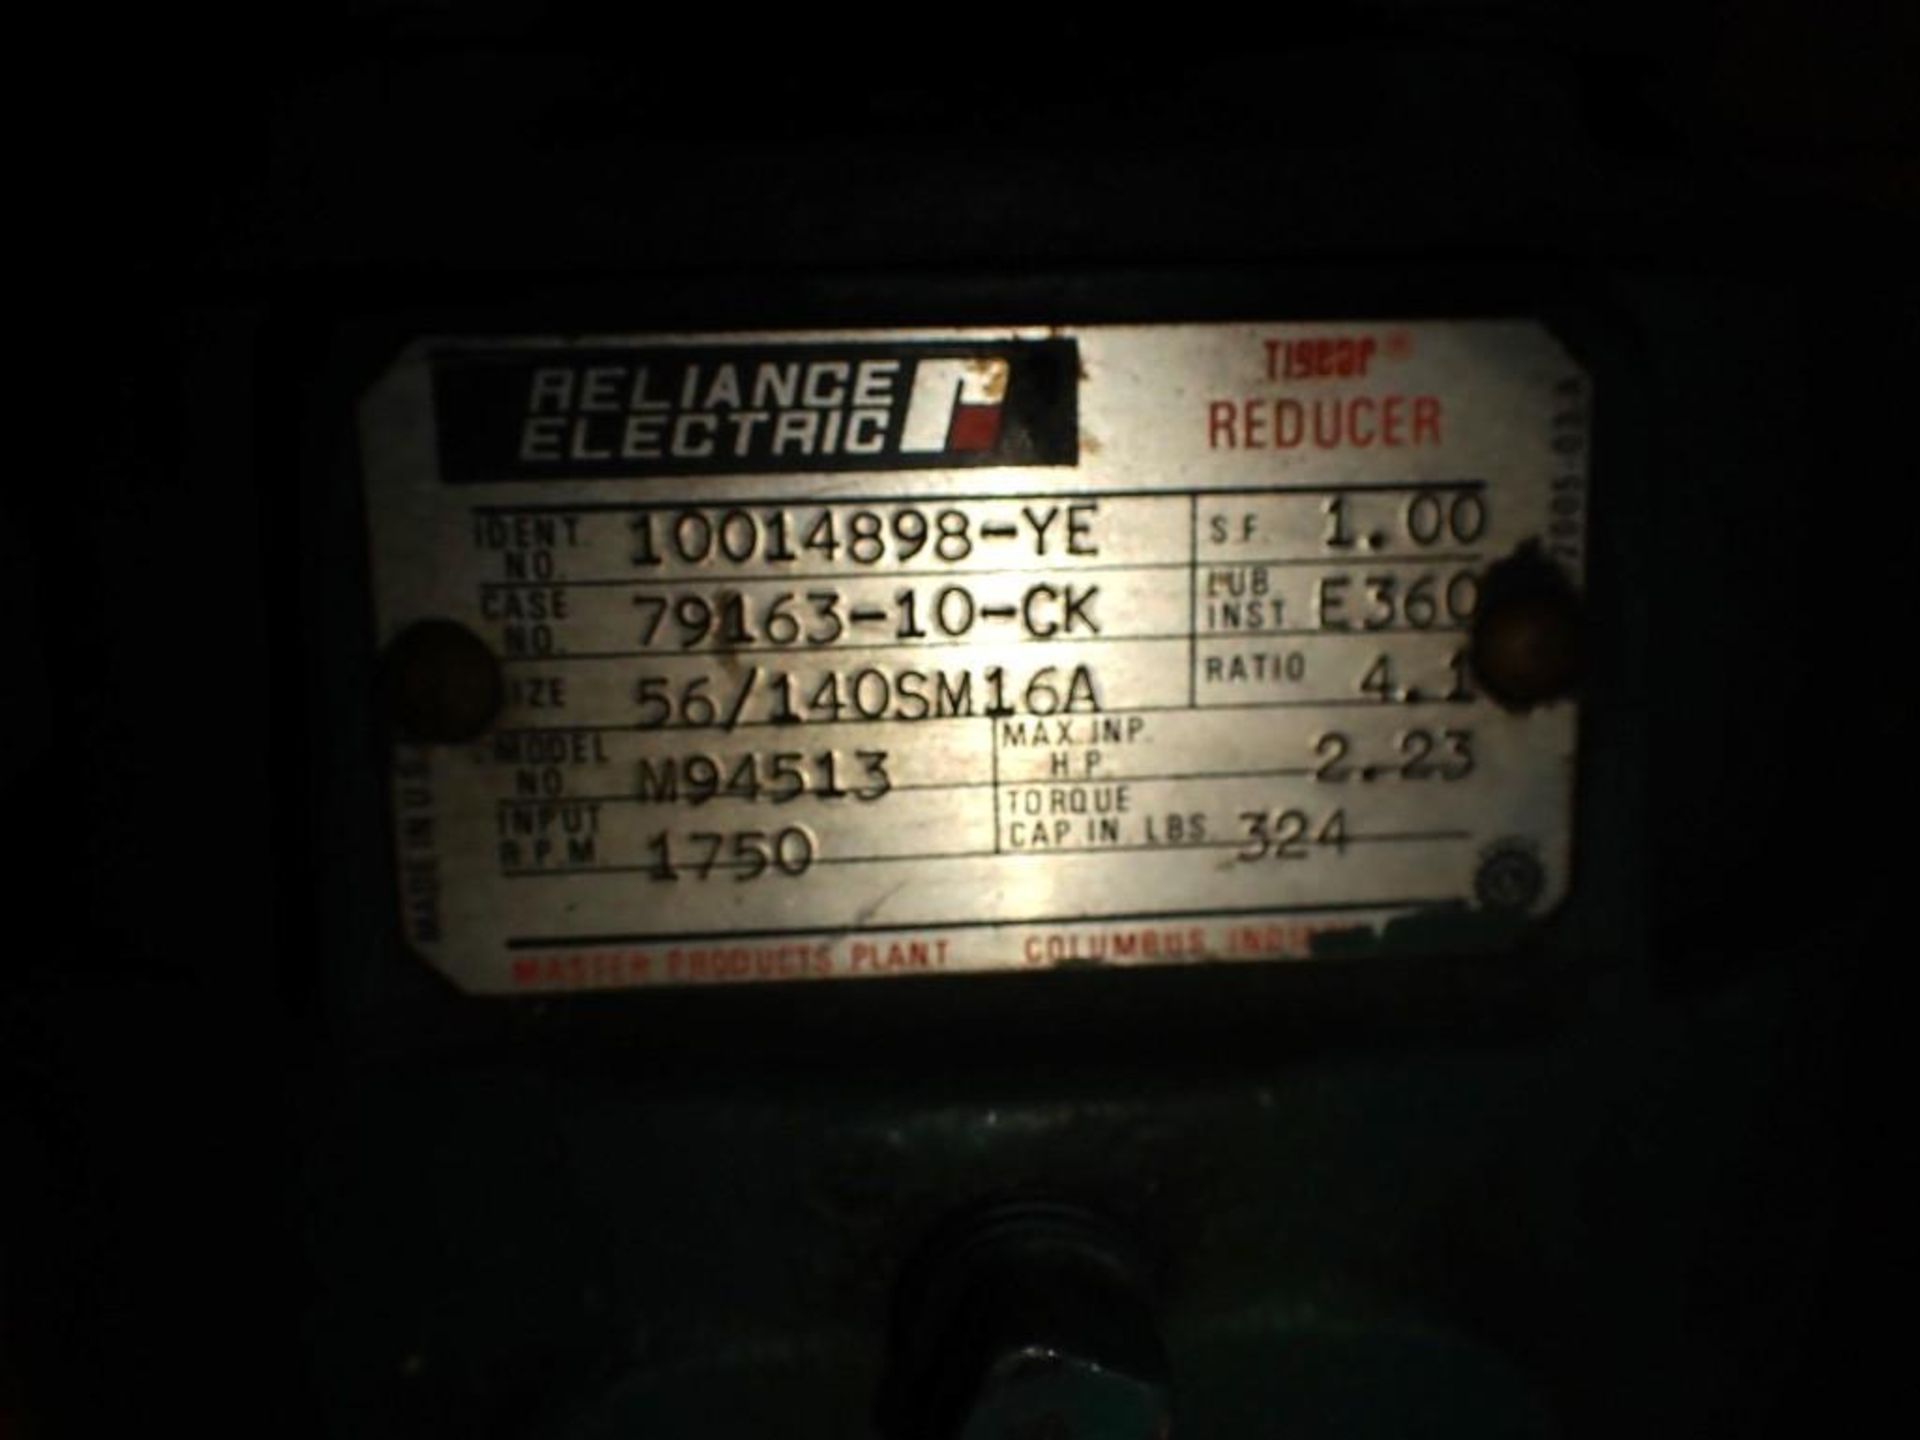 Reliance Motor w/Gear Reducer #T56H1024M-WE/M94513 - Image 5 of 5